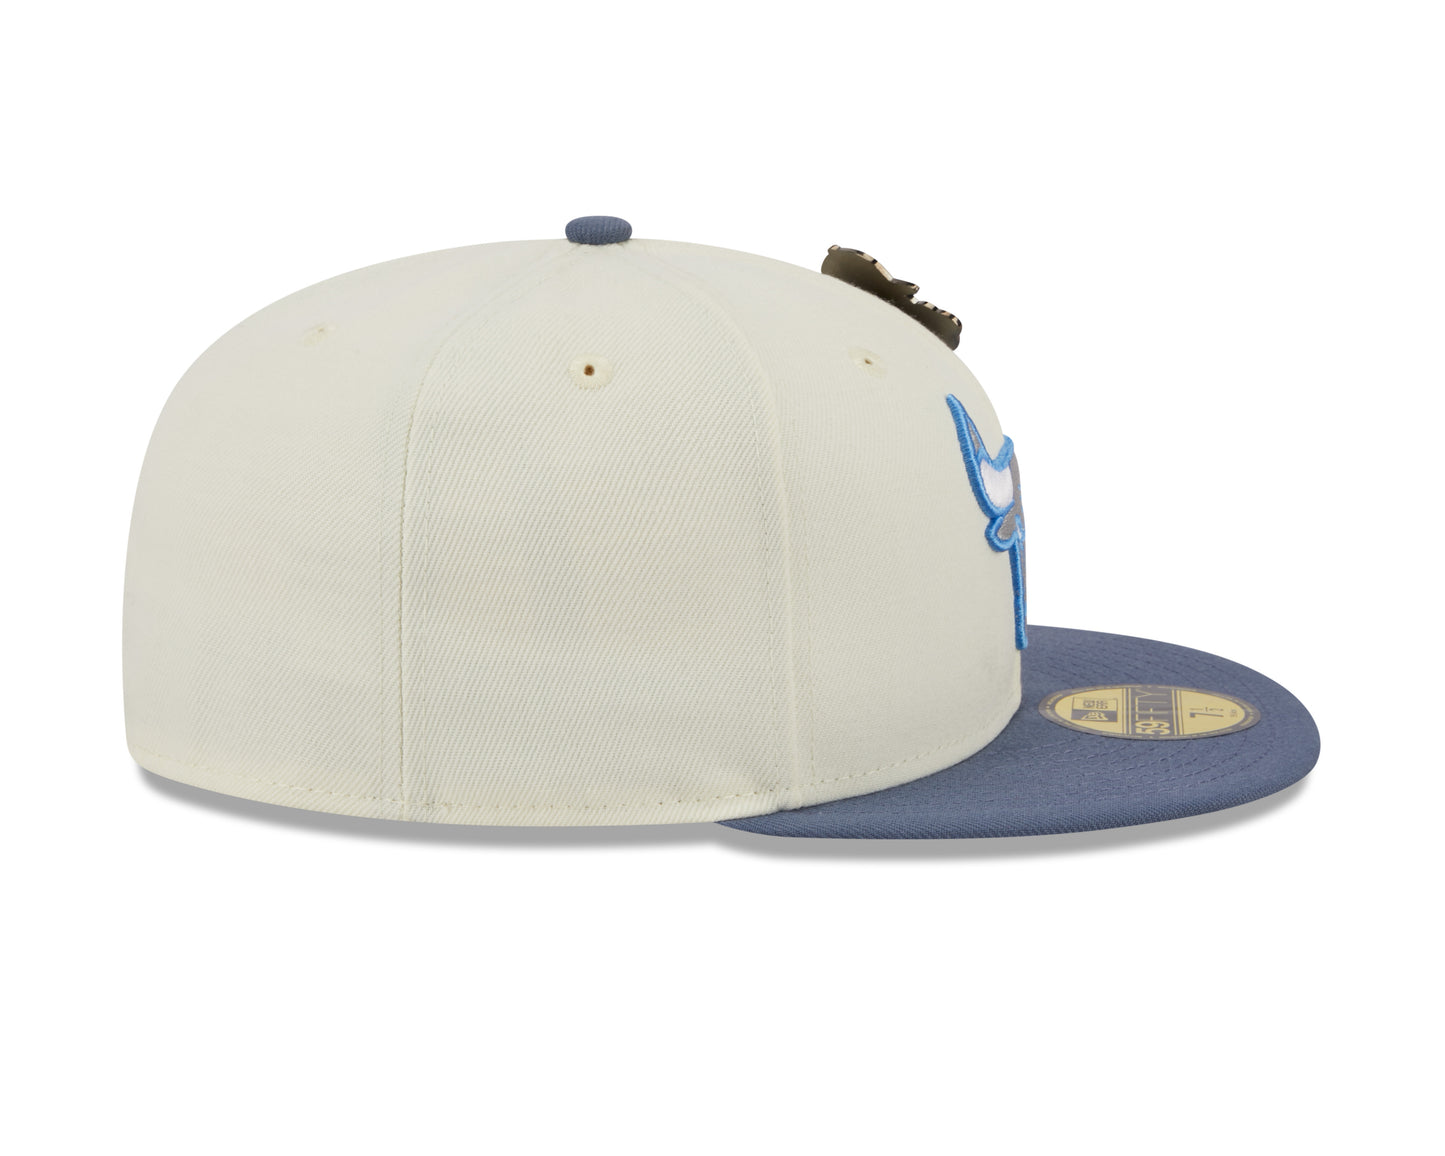 New Era 59fifty Fitted Cap Chicago Bulls THE ELEMENTS - Chrome White/Blue - Headz Up 